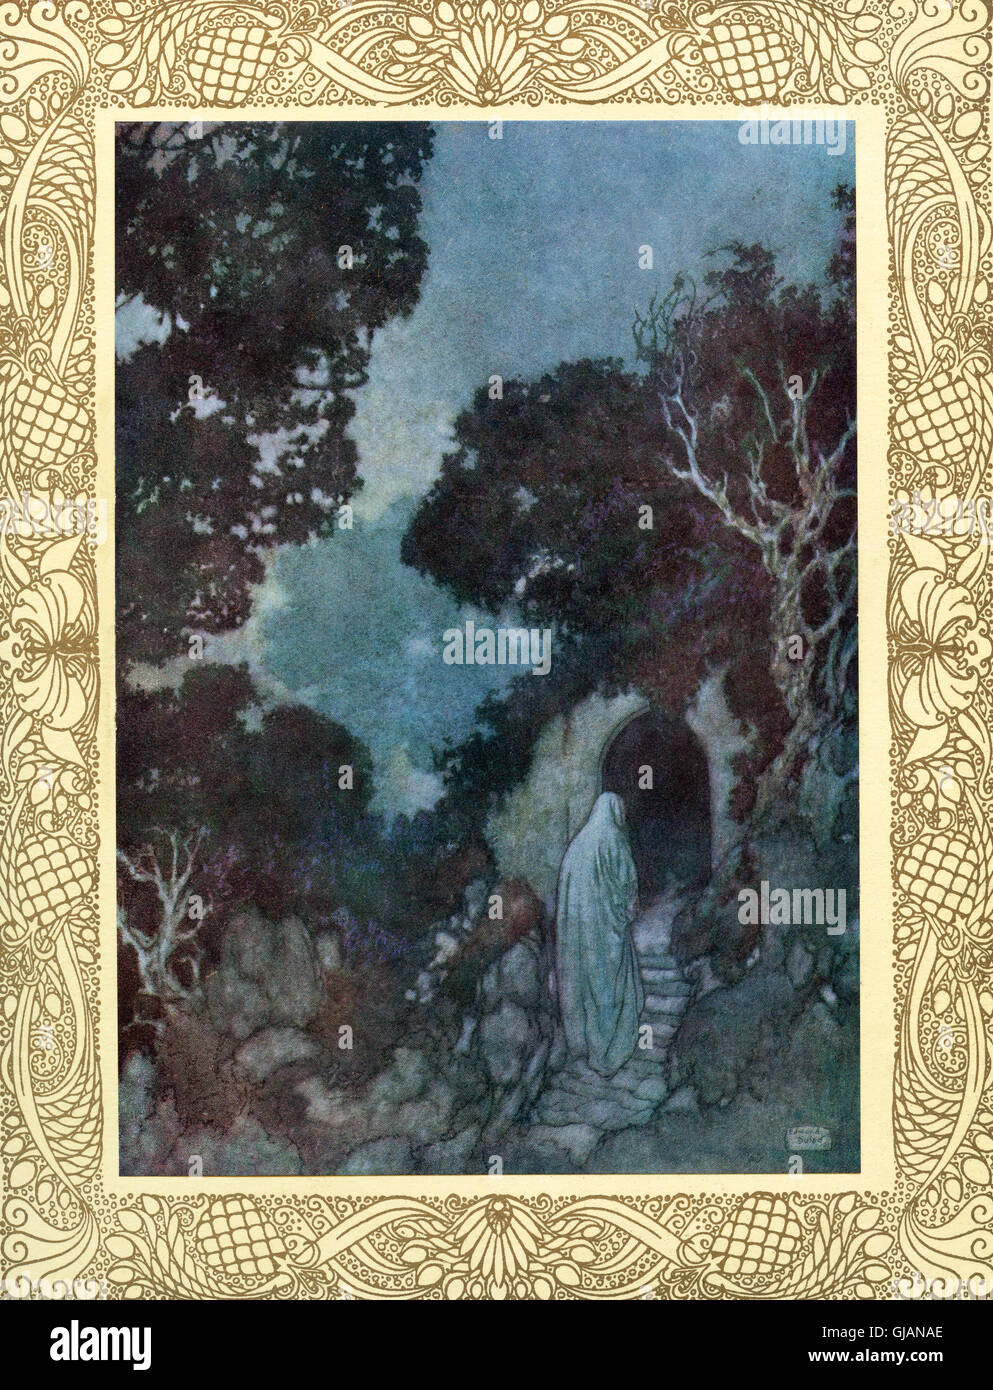 For some we loved, the loveliest and the best That from his Vintage rolling Time has prest, Have drunk their Cup a Round or two before, And one by one crept silently to rest.  Illustration by Edmund Dulac from the Rubaiyat of Omar Khayyam, published 1909. Stock Photo